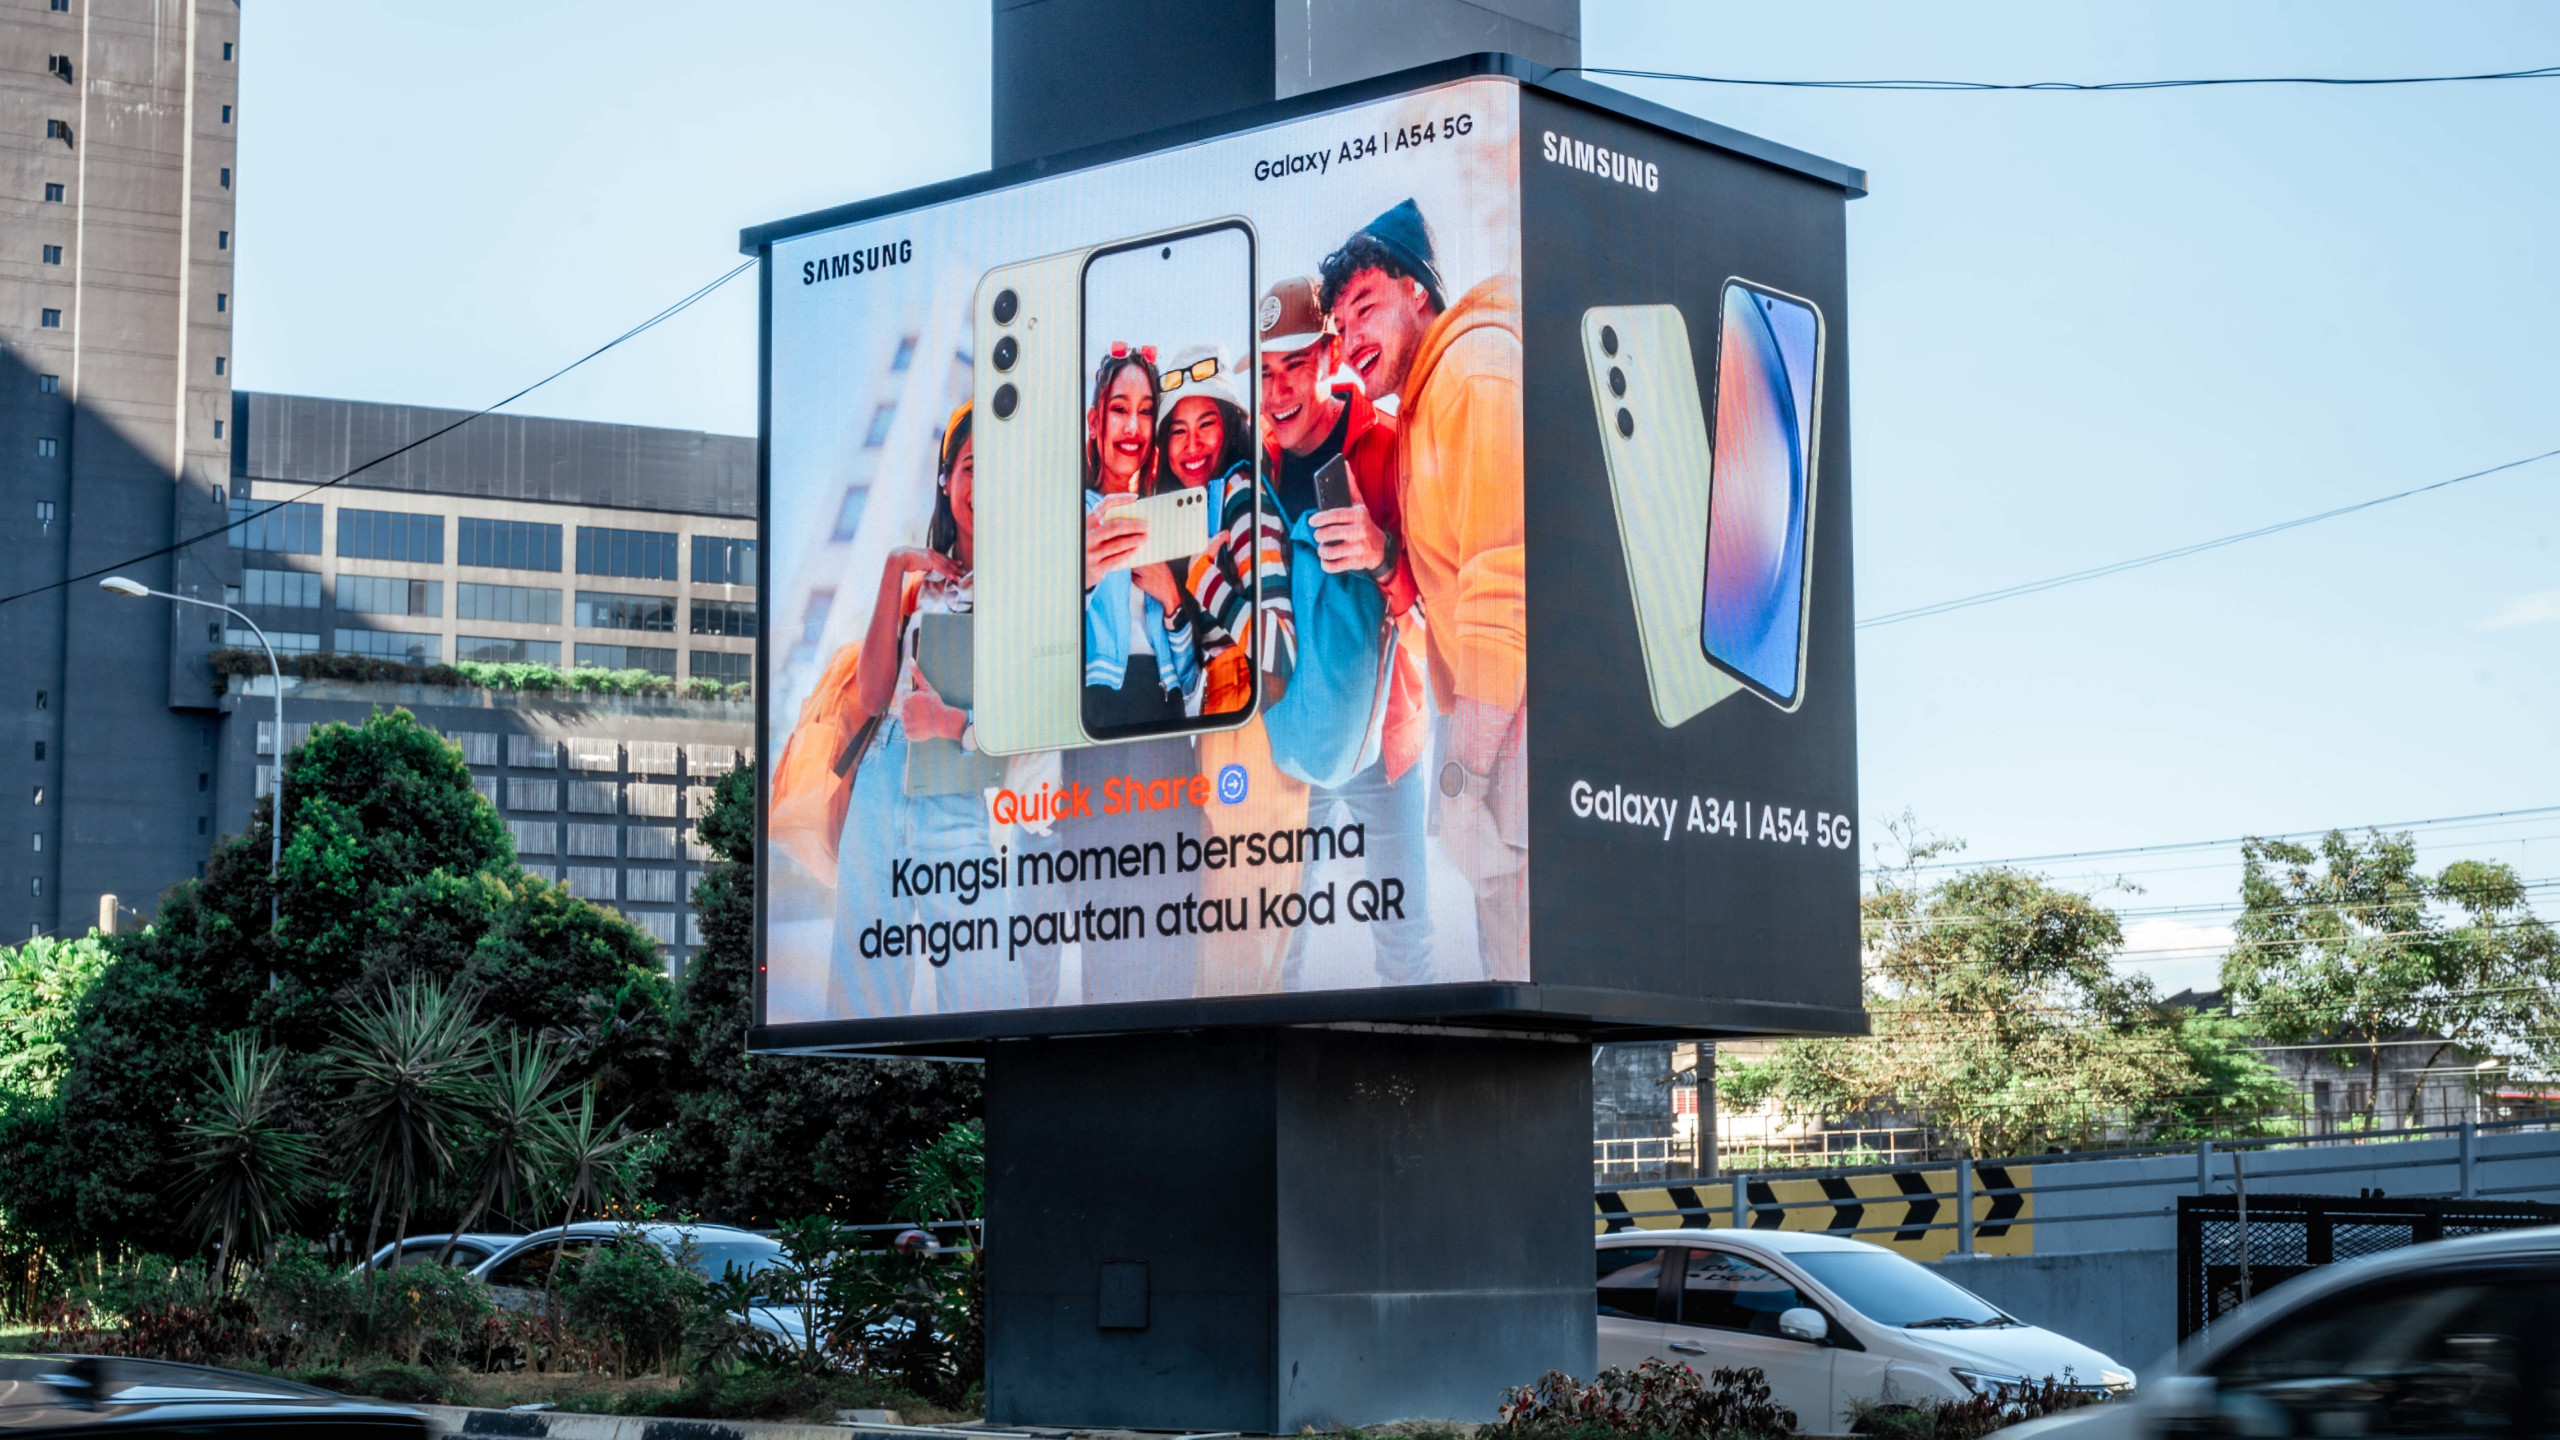 Leading electronics corporation leveraged dayparting to activate high impact creatives on DOOH screens targeting consumers at selected time of day in multiple cities.